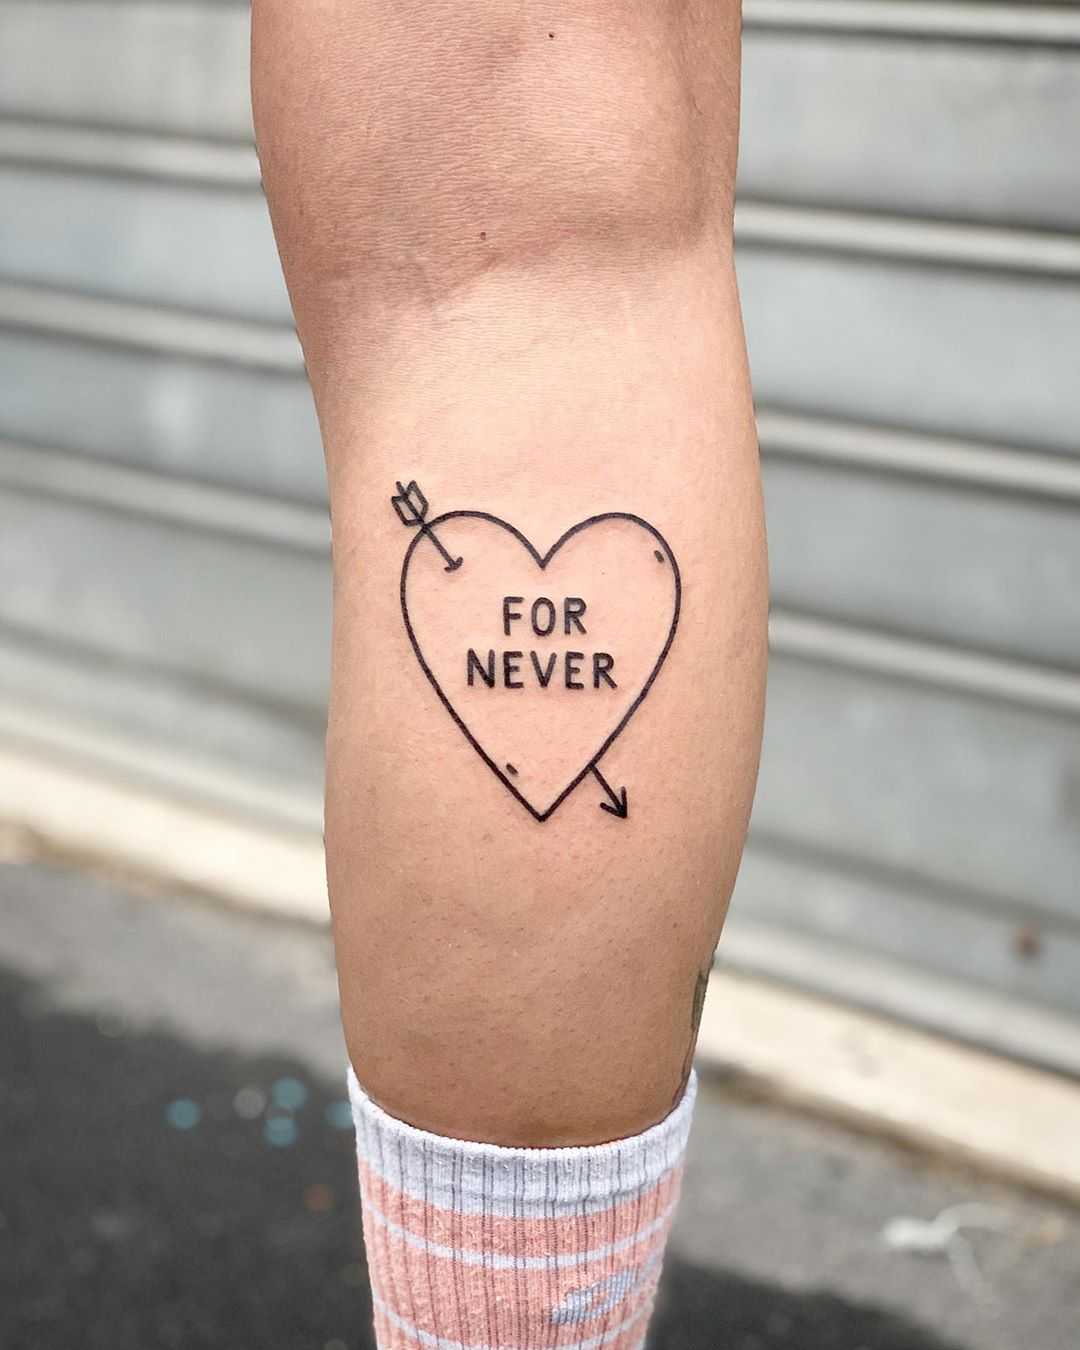 For never by @themagicrosa